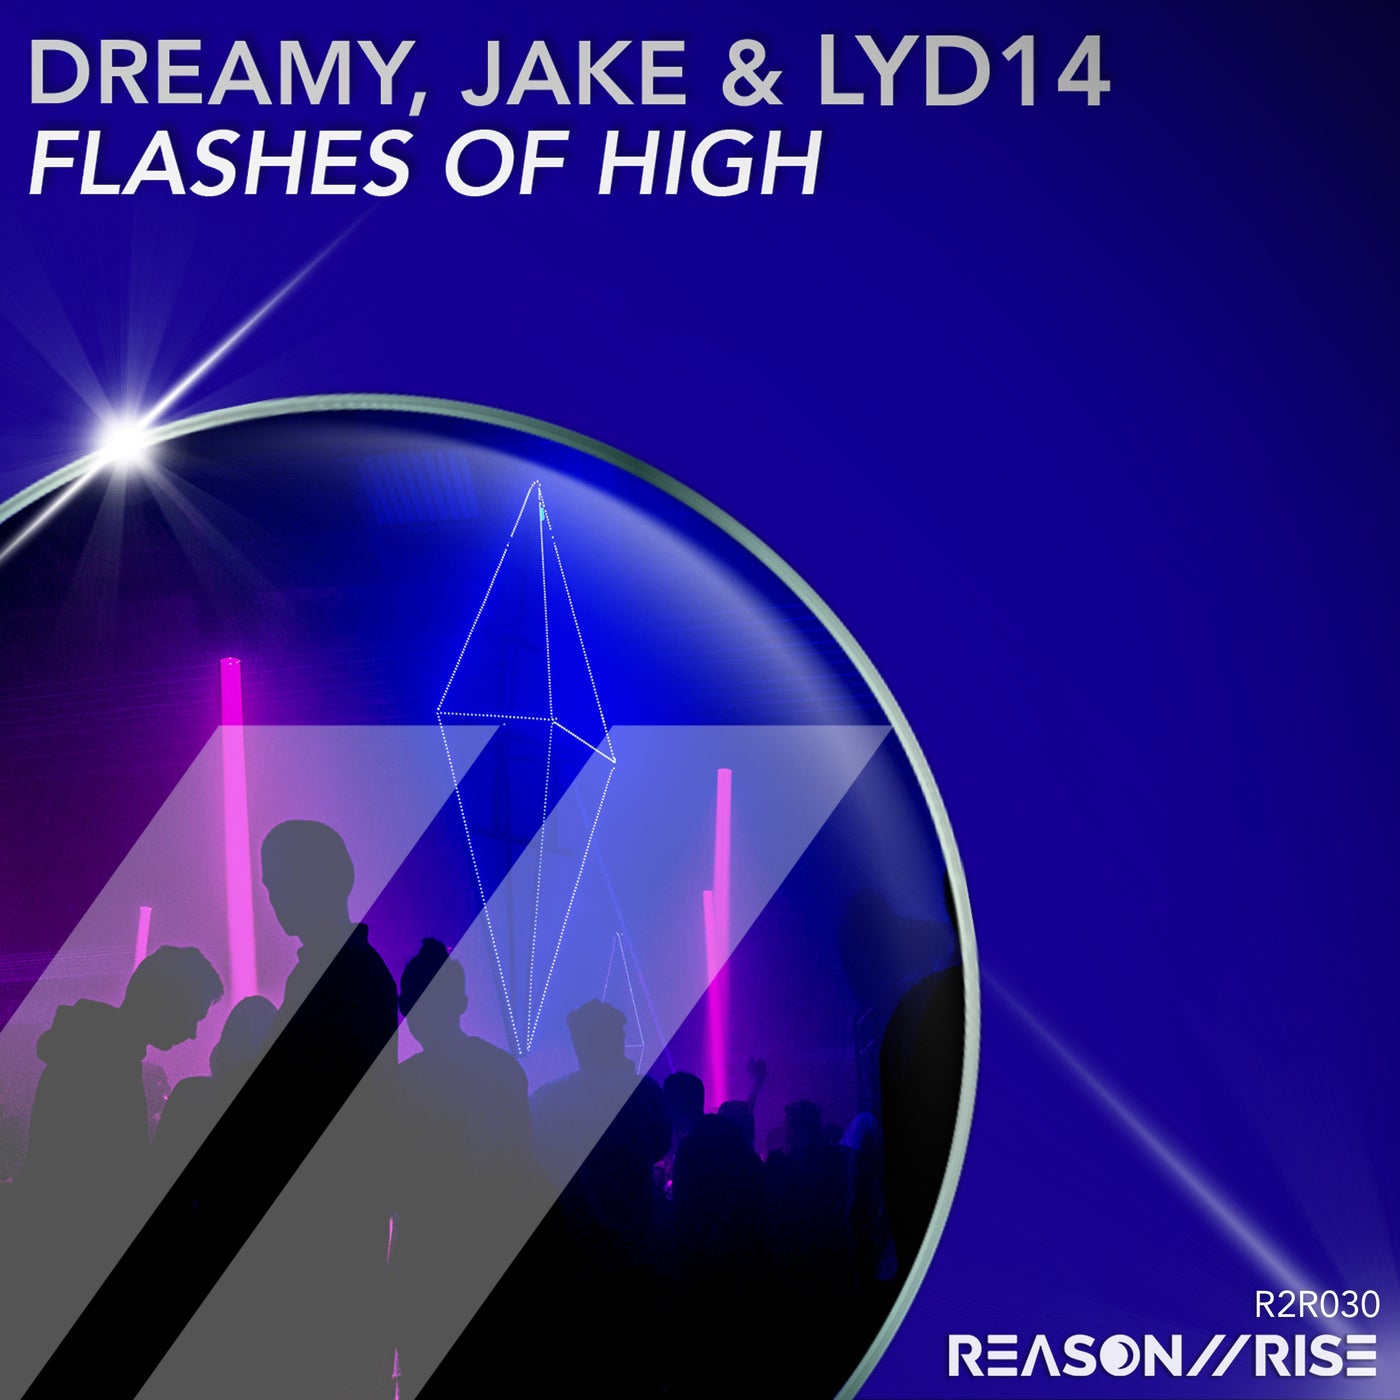 Jake, Dreamy – Flashes of High [R2R030]